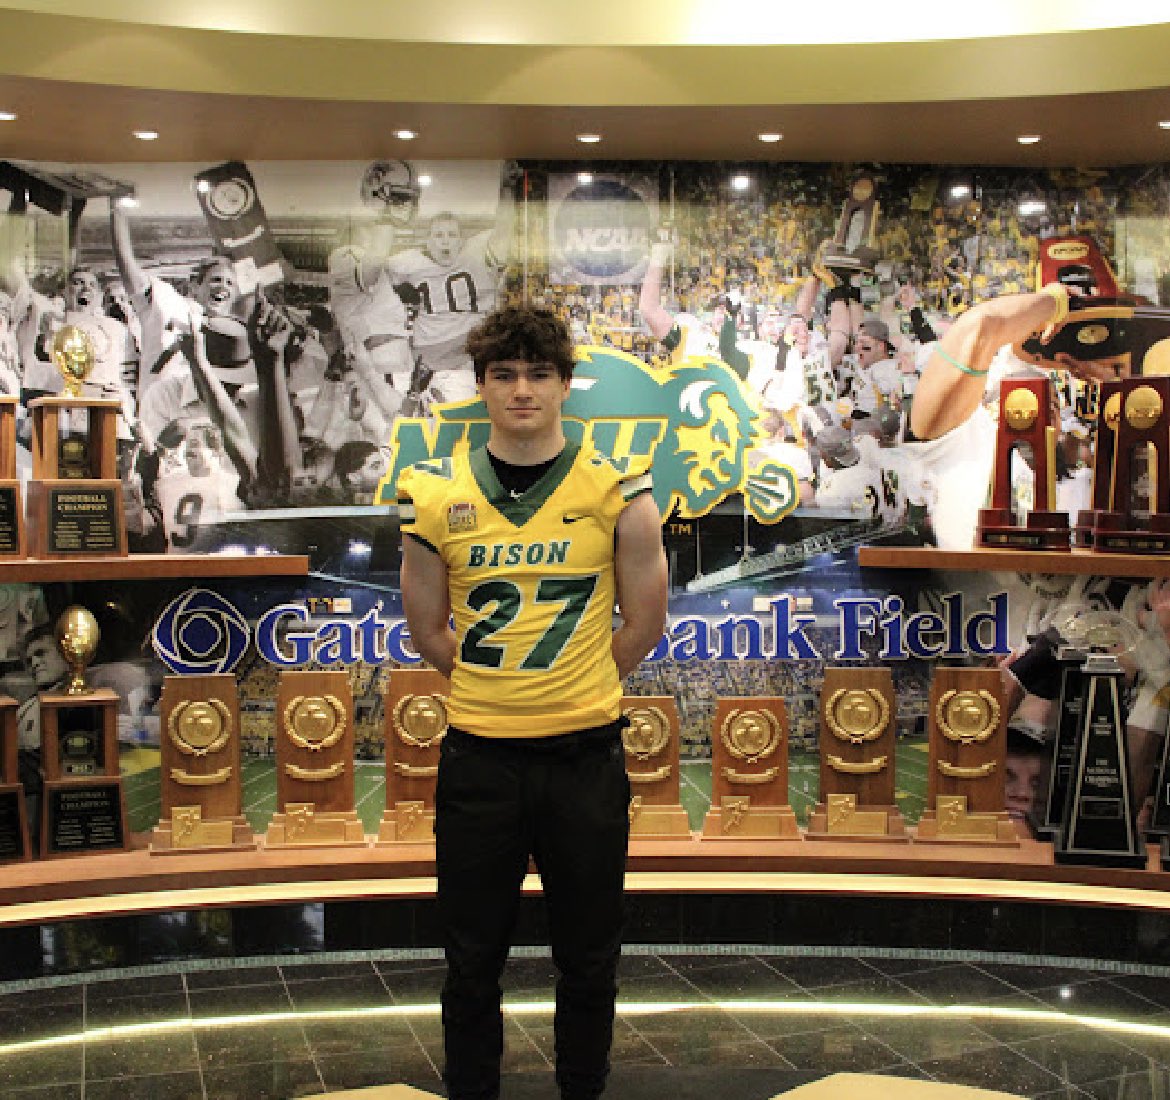 Had a great time in Fargo this weekend! Thank you @FBCoachLarson for the invite! @CoachOlsonNDSU @NickGoeser @PHSPirateFB